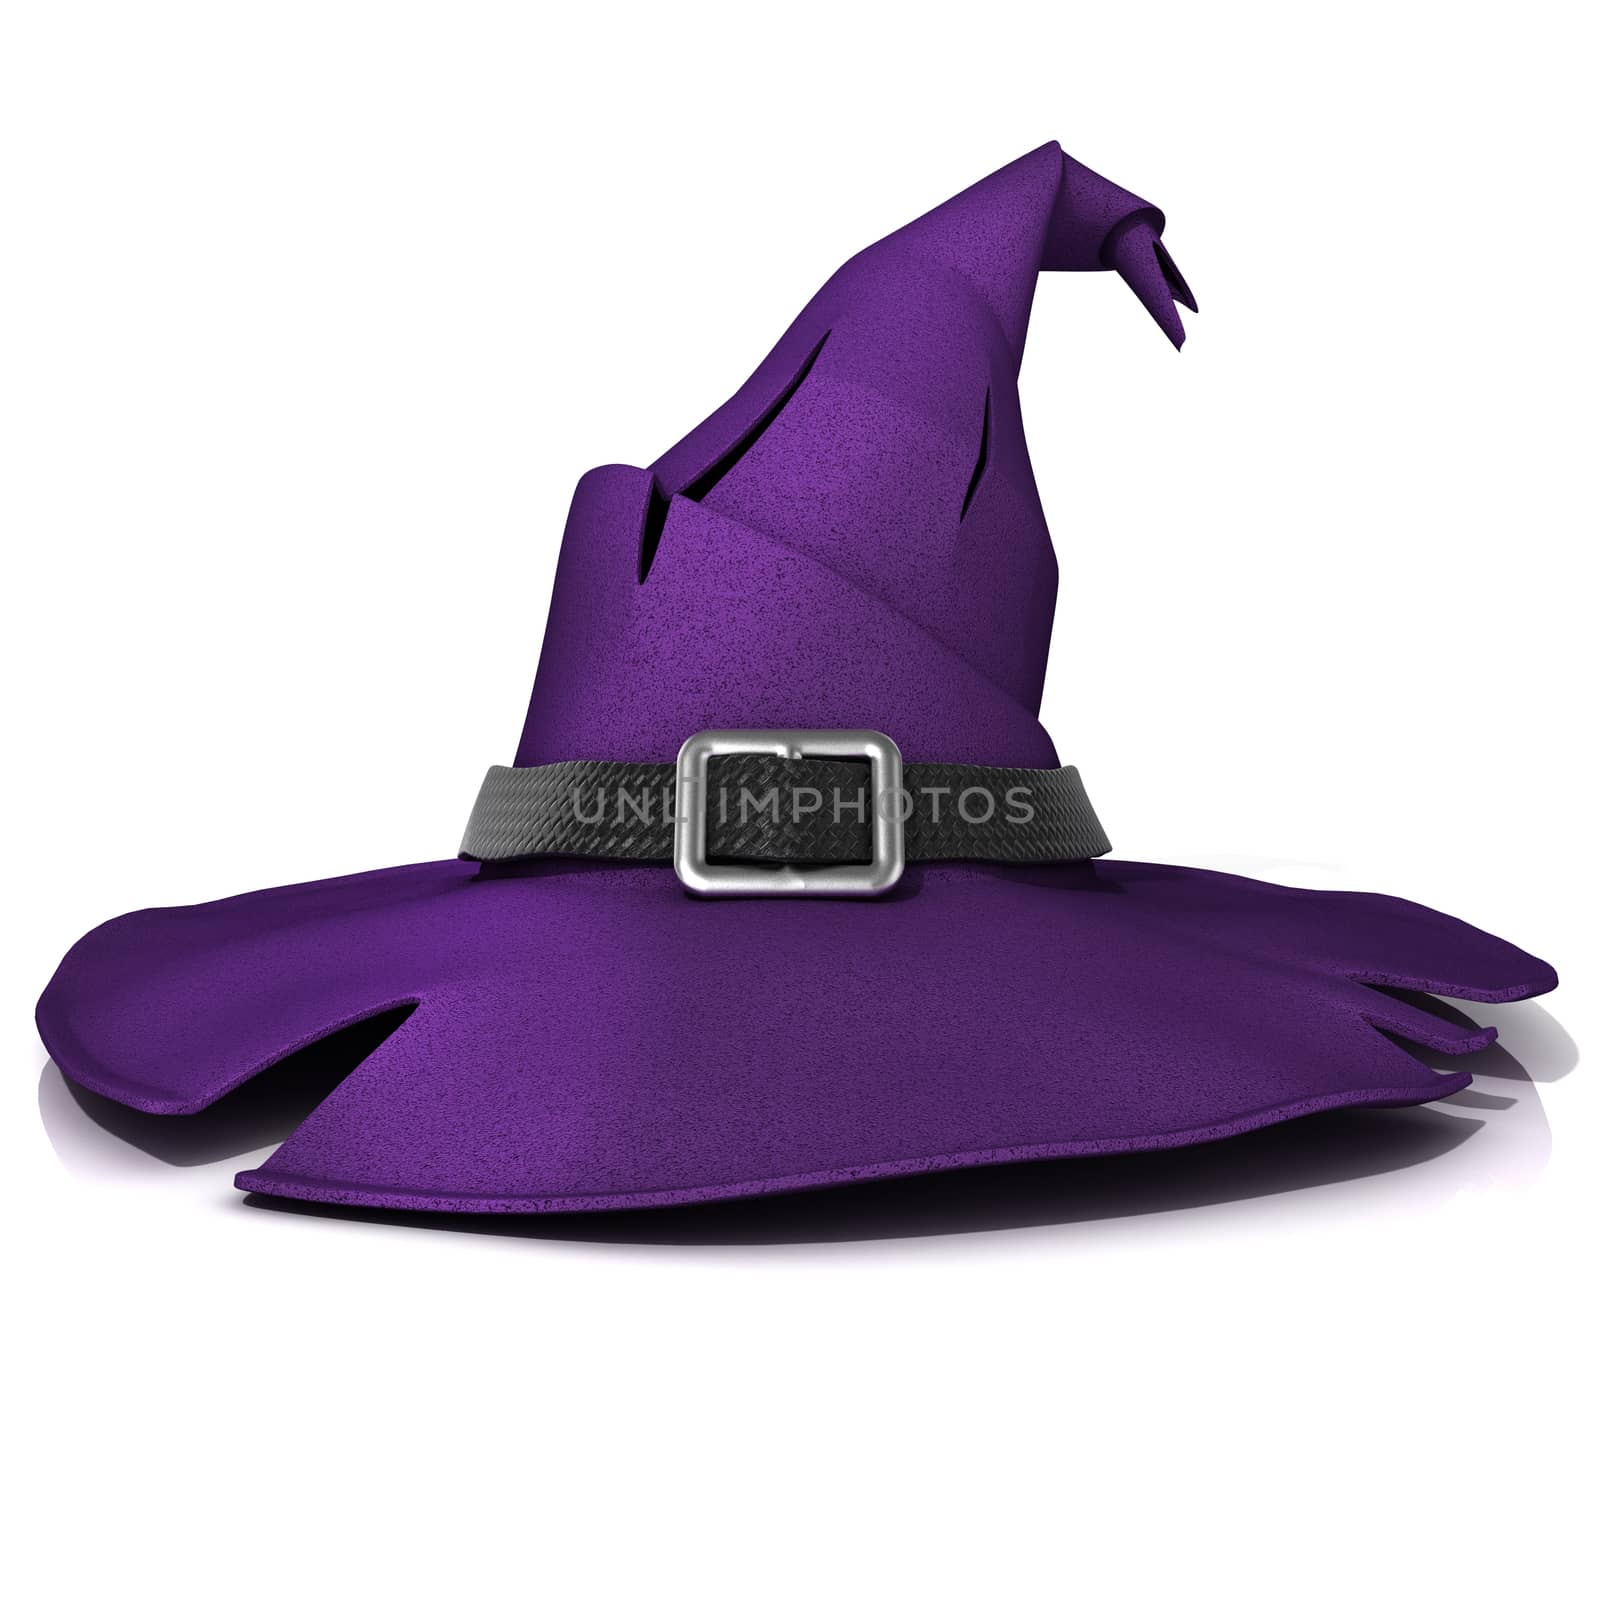 Halloween, witch hat. Purple hat with black belt. Isolated on white background